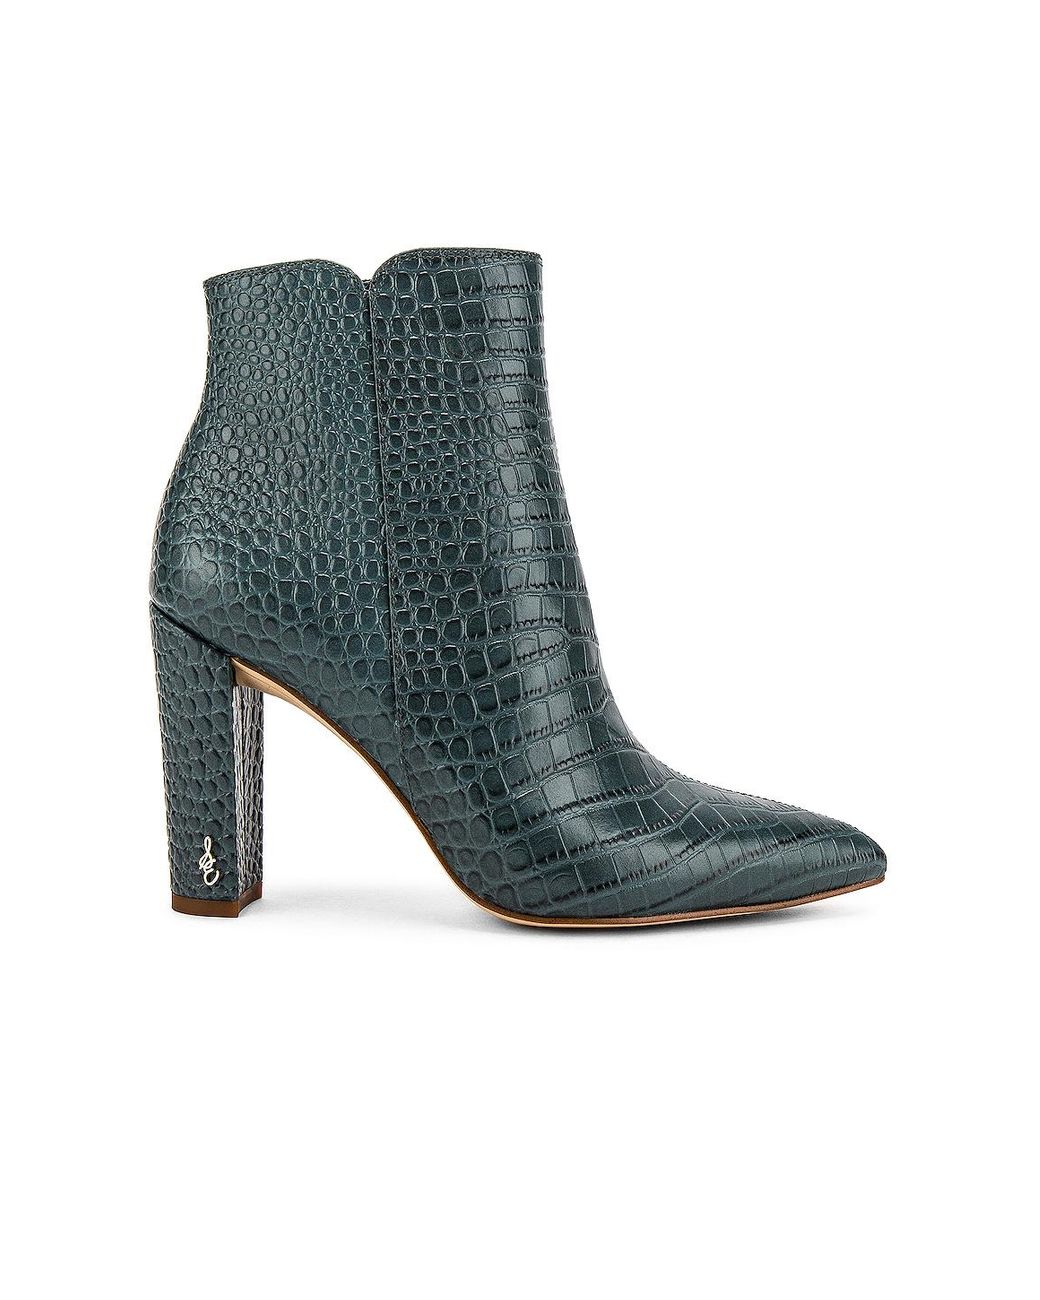 Sam Edelman Raelle 2 Croc-embossed Leather Ankle Boots in Grey Iris ...